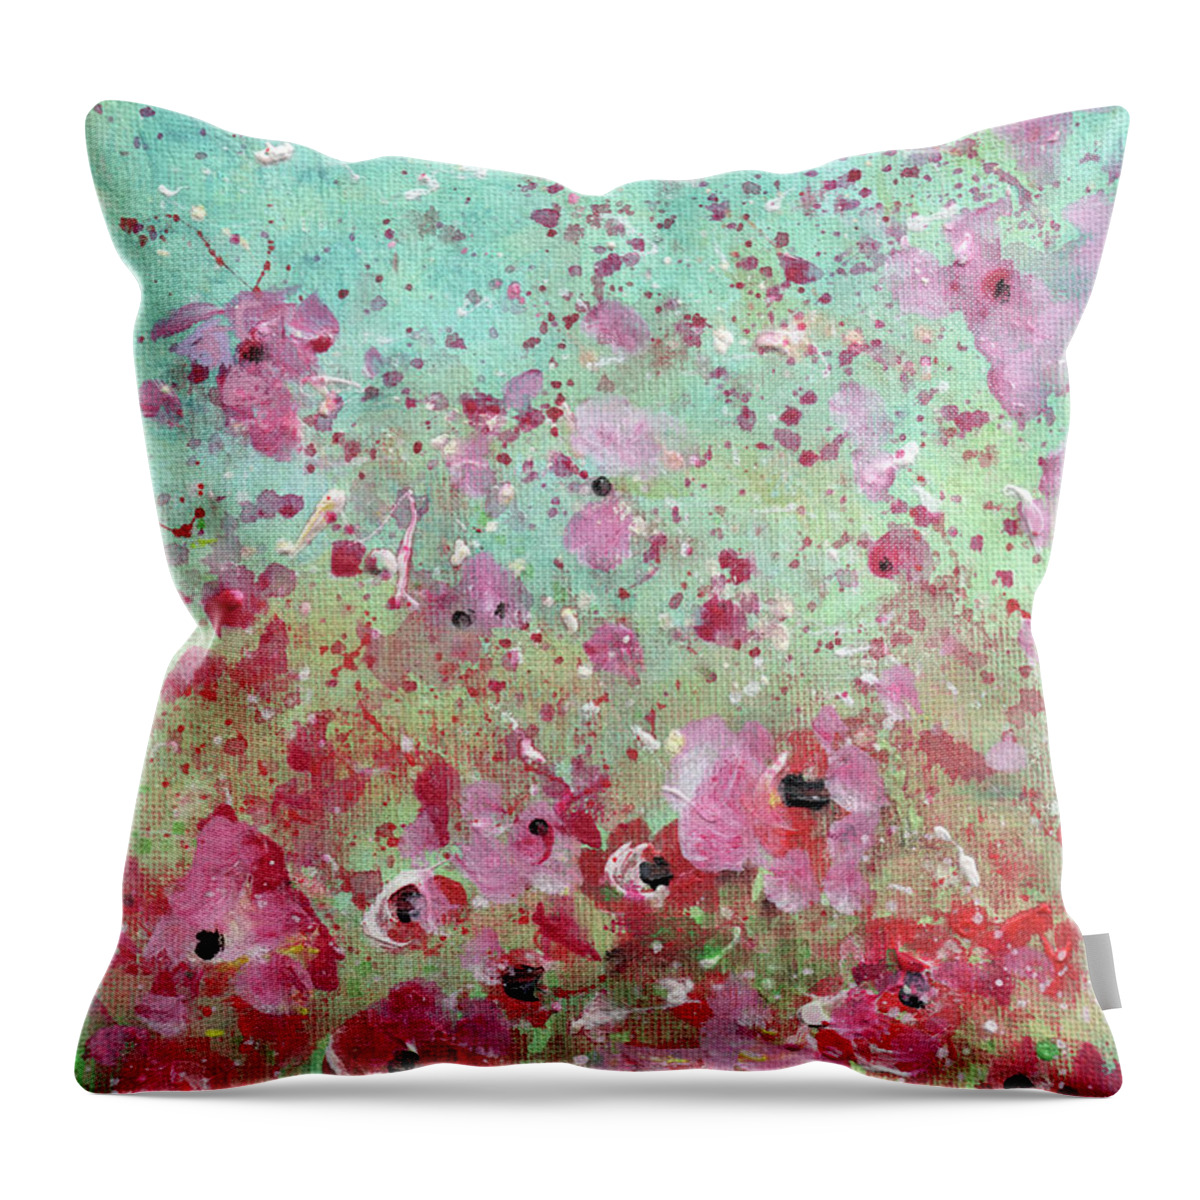 Spring Throw Pillow featuring the painting Spring Is In The Air 13 by Miki De Goodaboom